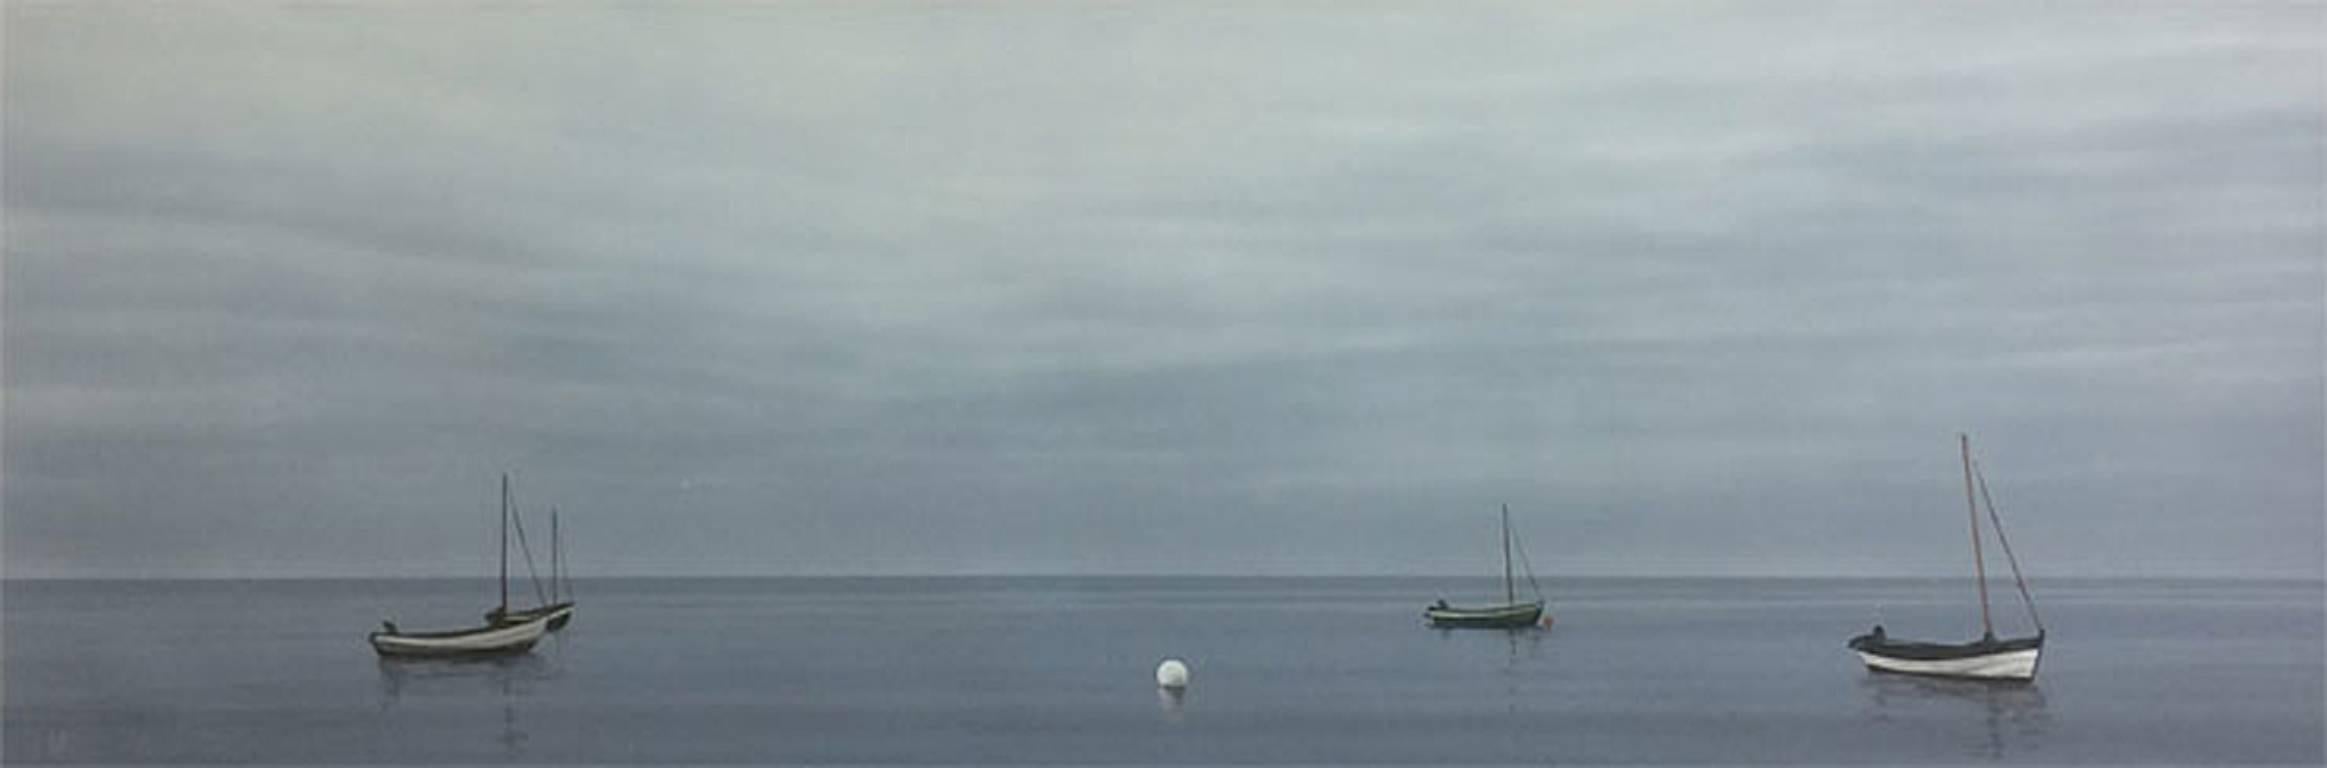 Grey Dawn with Boats - contemporary seaside beach landscape painting